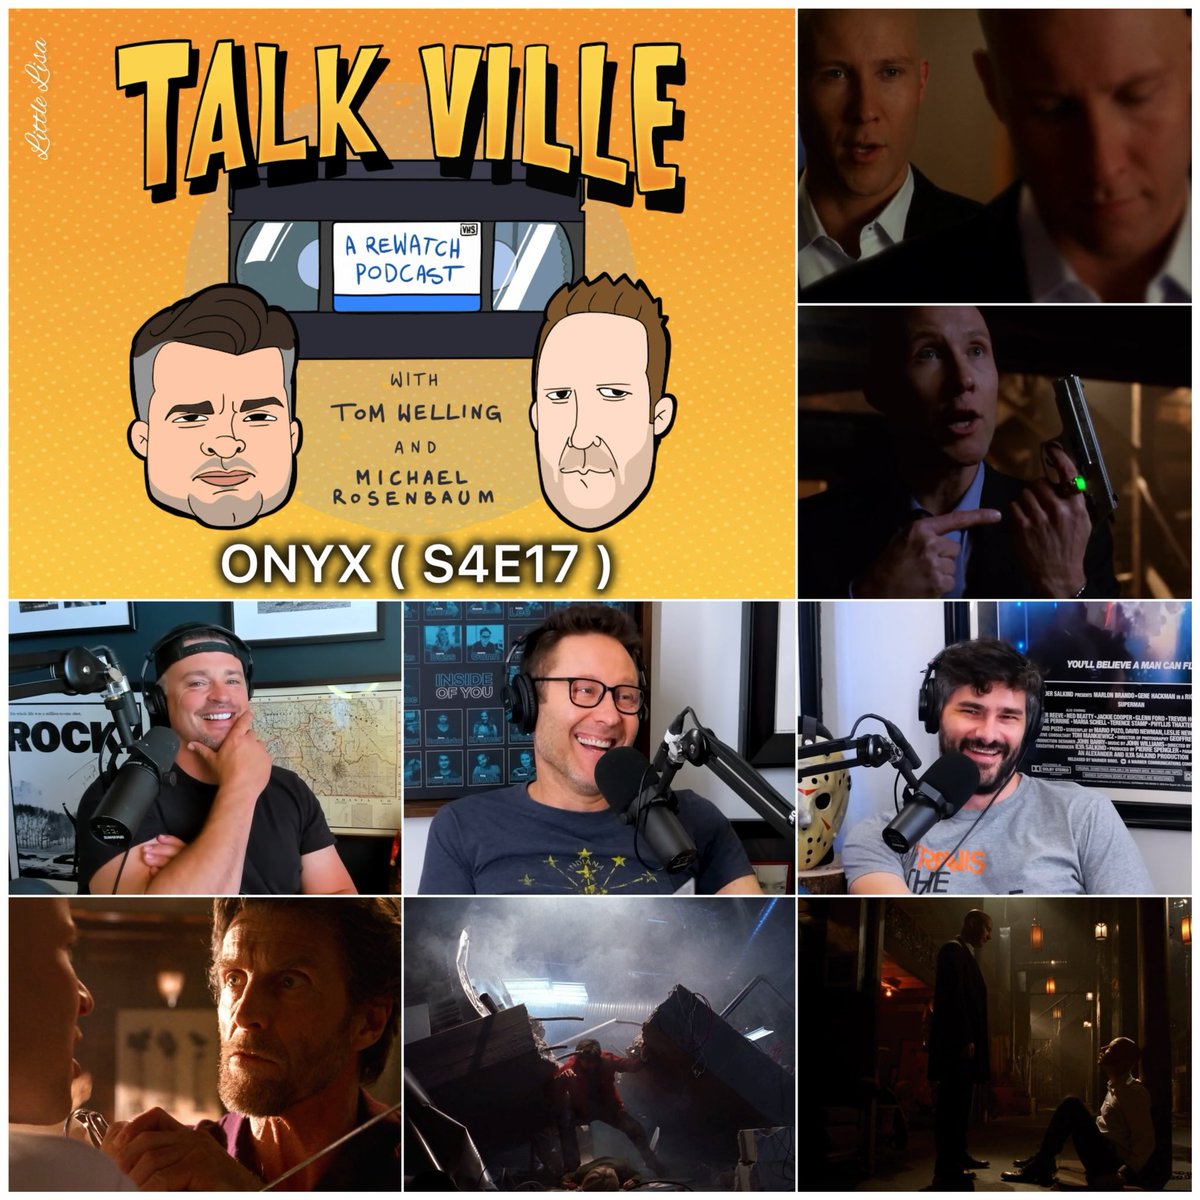 Tom Welling, @michaelrosenbum & @TellezRyan dive into one of the best episodes of Smallville on this week’s @TalkVillePod Listen to ONYX ( S4E17 ) available now on all podcast platforms & in video on YouTube. 👉 talkvillepodcast.com/show 📺: youtu.be/K9W5CdlB_EY?si…